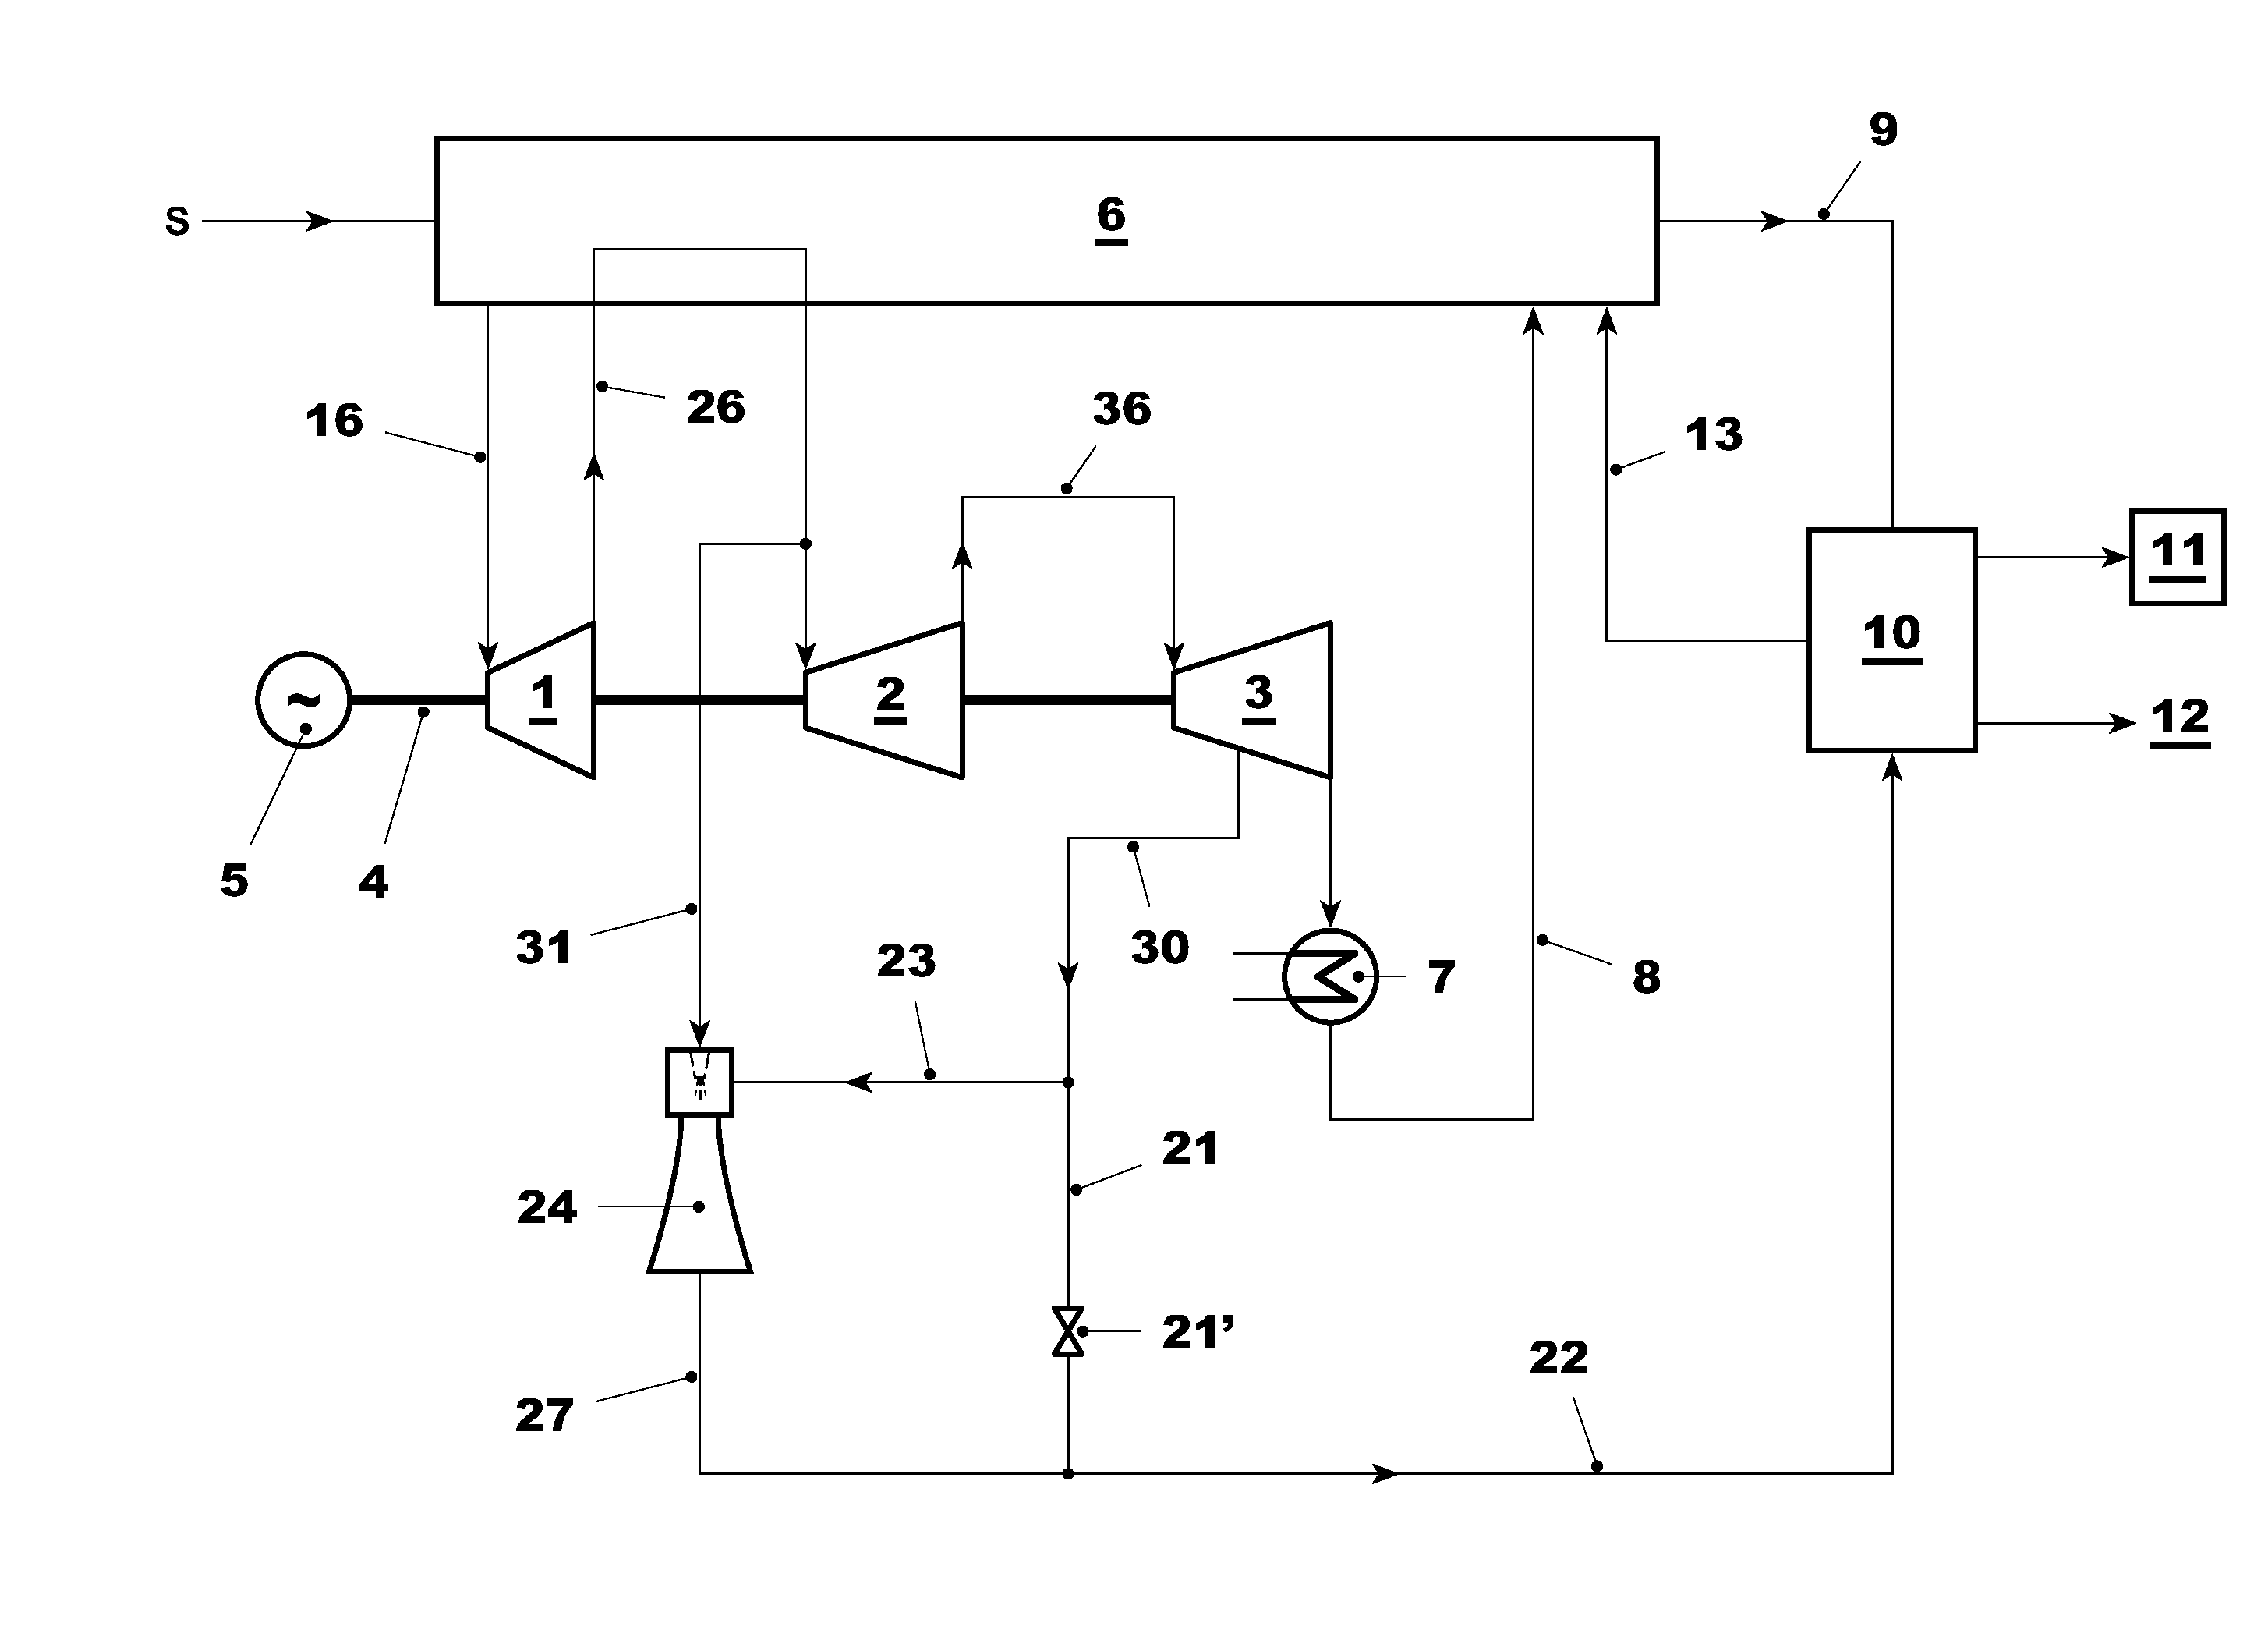 Power plant with co2 capture and method to operate such power plant